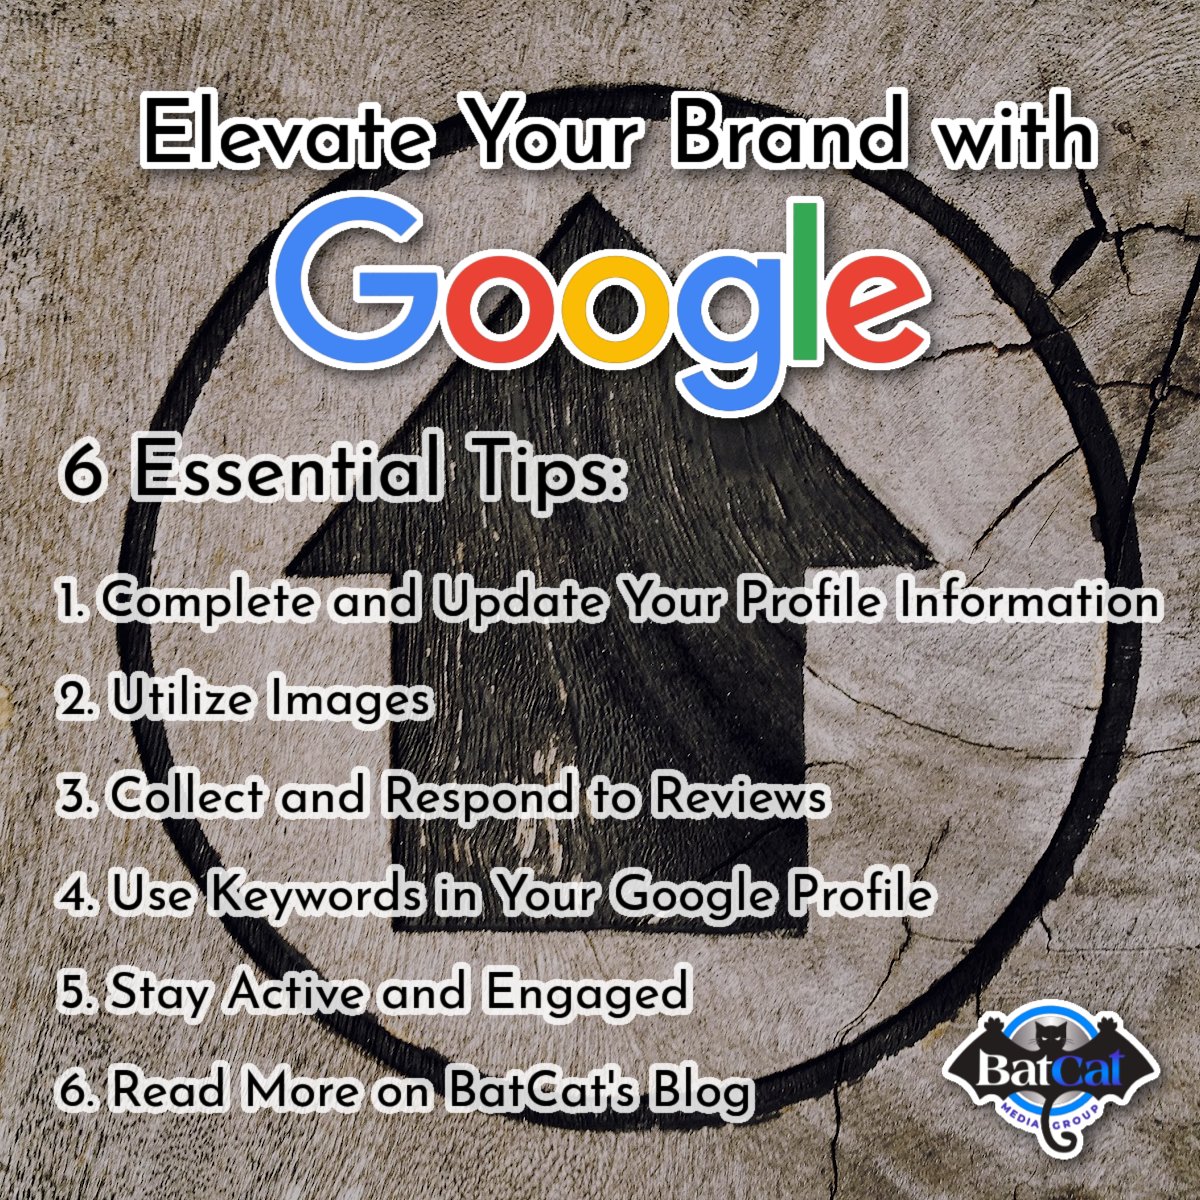 Your Google profile is more than just a listing, it's your brand ambassador! 🌐 These 6 actionable tips can optimize your profile for maximum impact. 🌟 Let's make sure your business shines bright online! ✨ #BatCatMediaGroup #DigitalStrategy